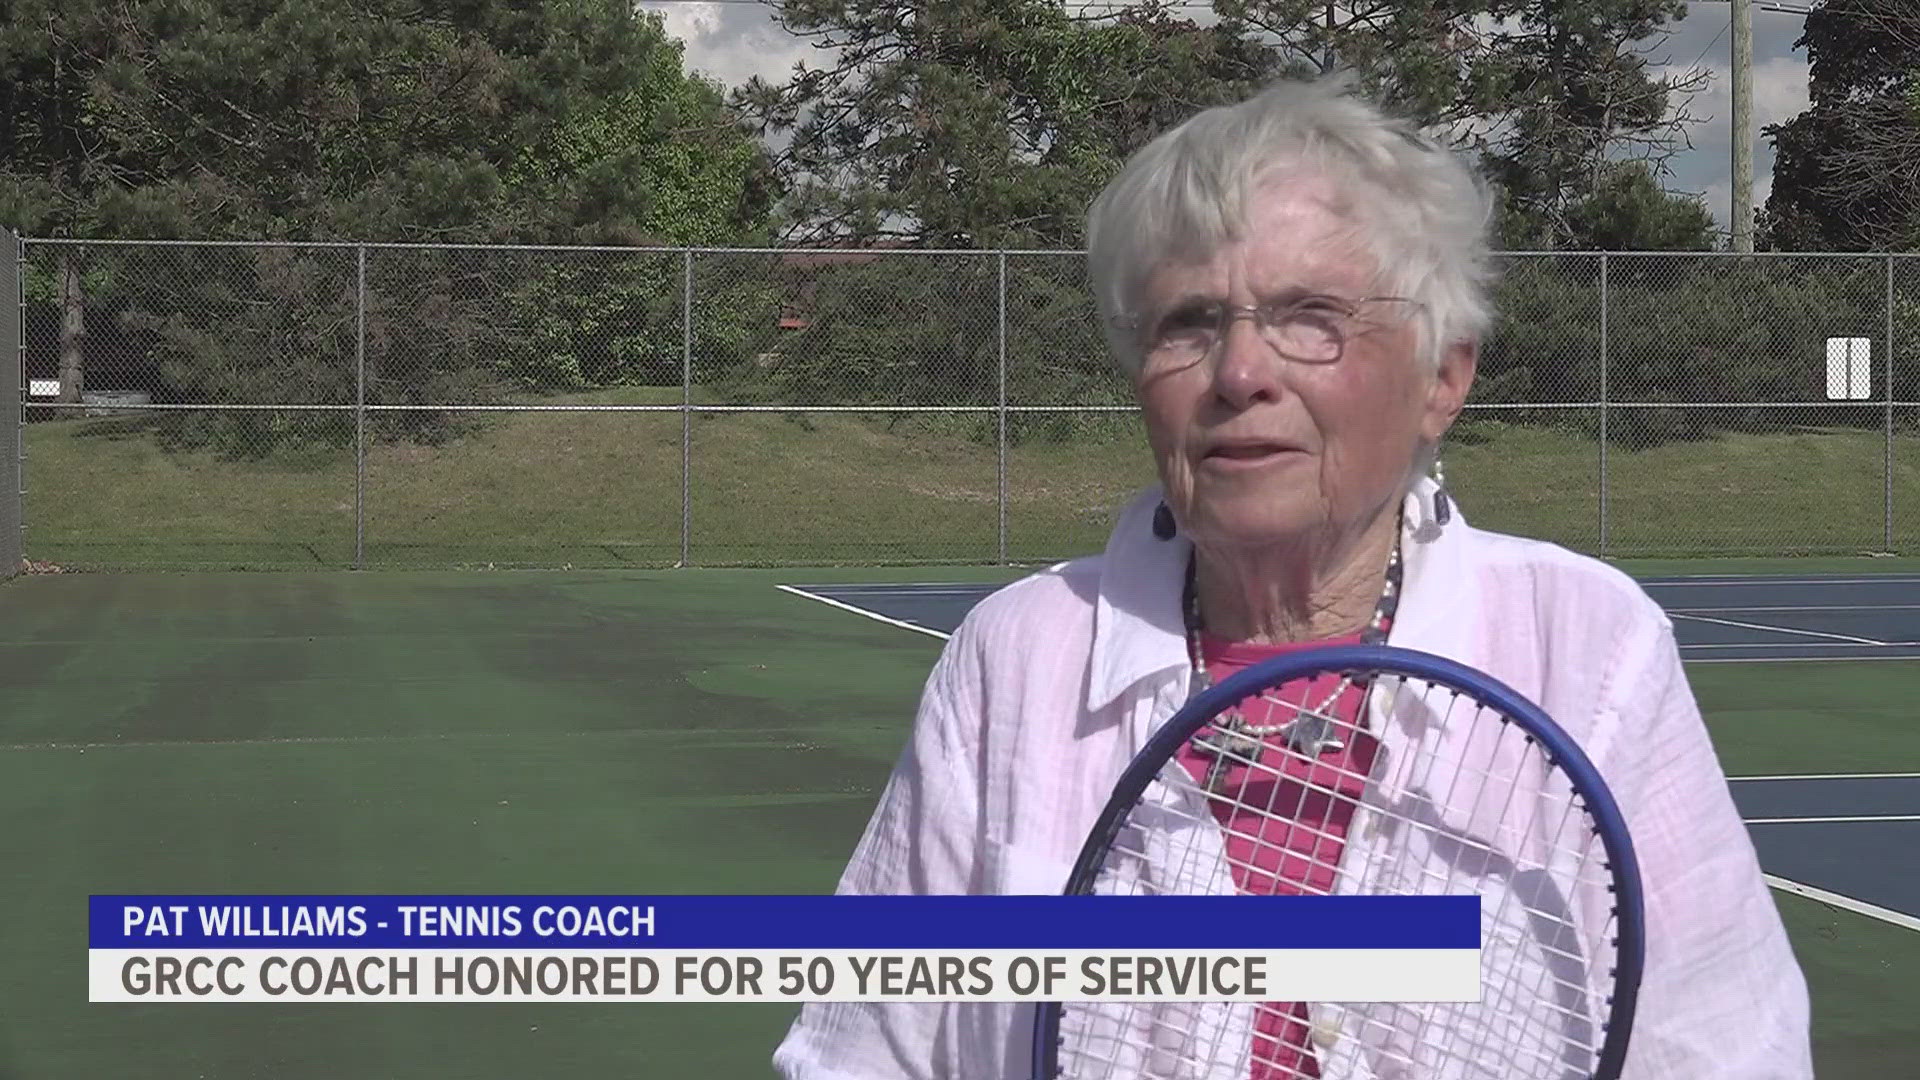 Grand Rapids Catholic Central High School honored coach Pat Williams on Wednesday evening with a celebration on the courts where she's coached for decades.